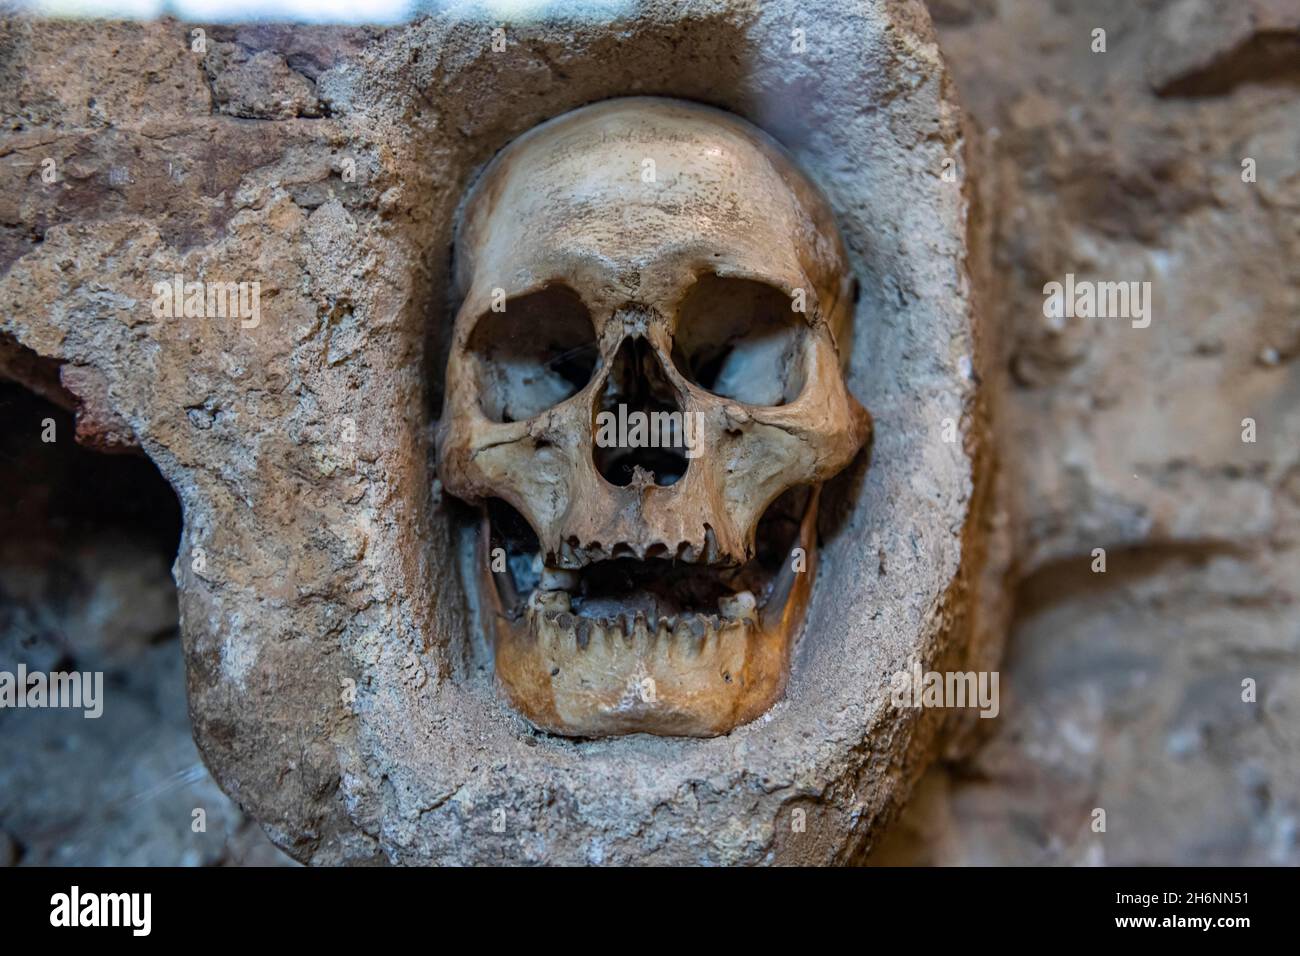 Stone structure embedded with human skulls, Skull tower, Nis, Serbia Stock Photo